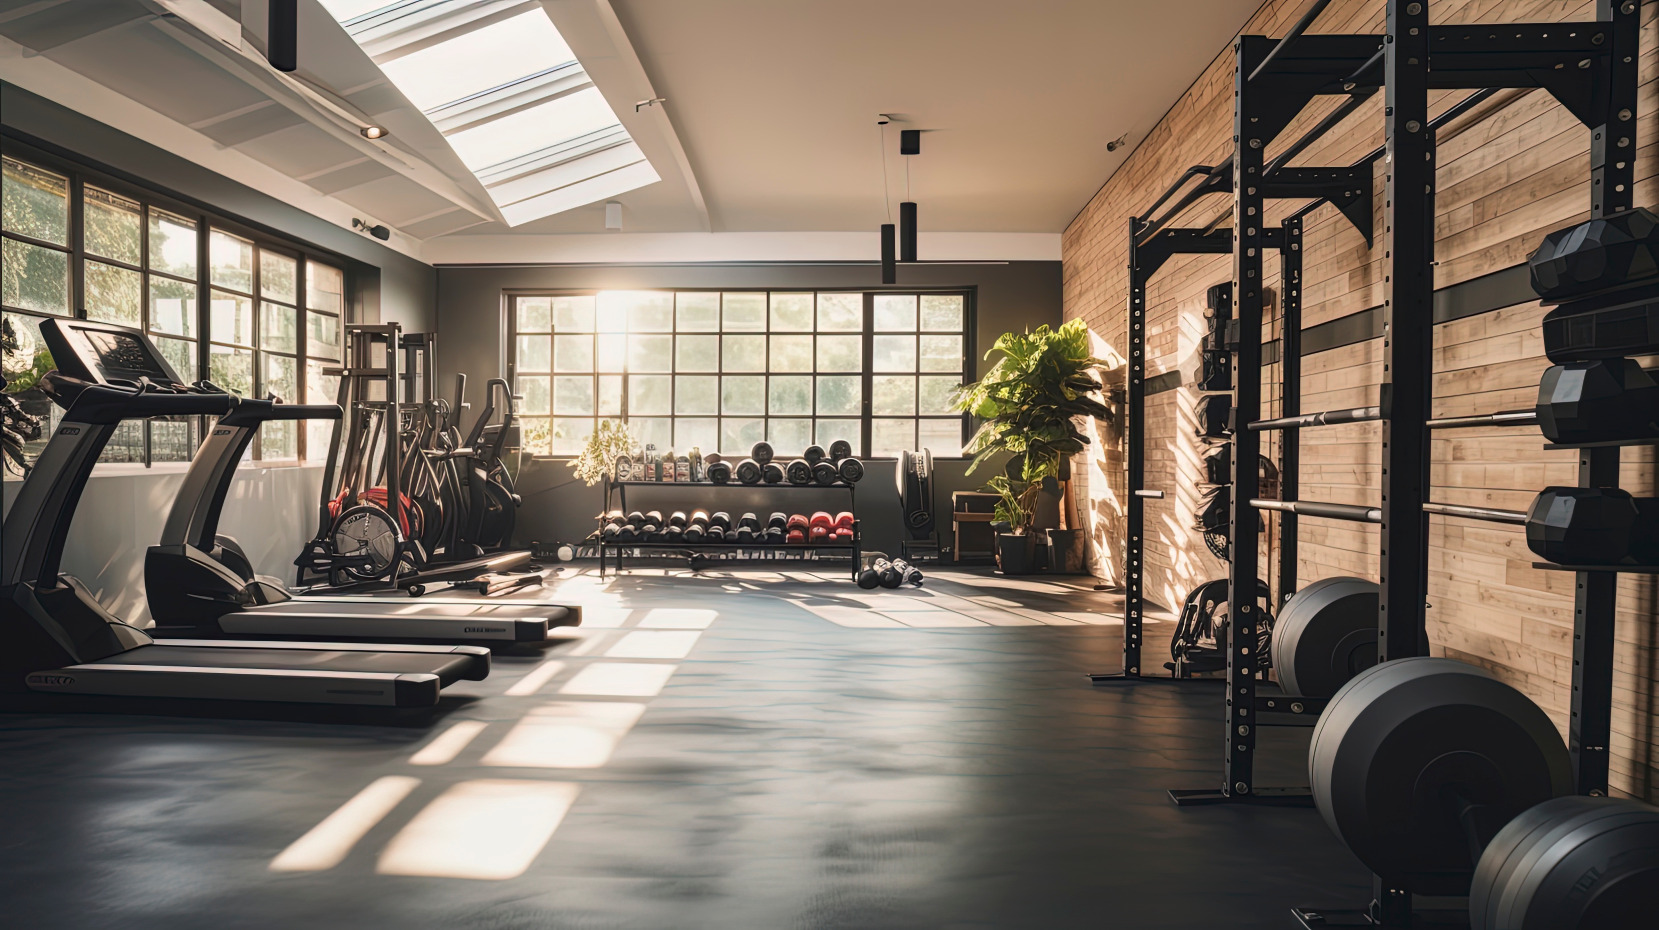 Garage converted into gym with large windows